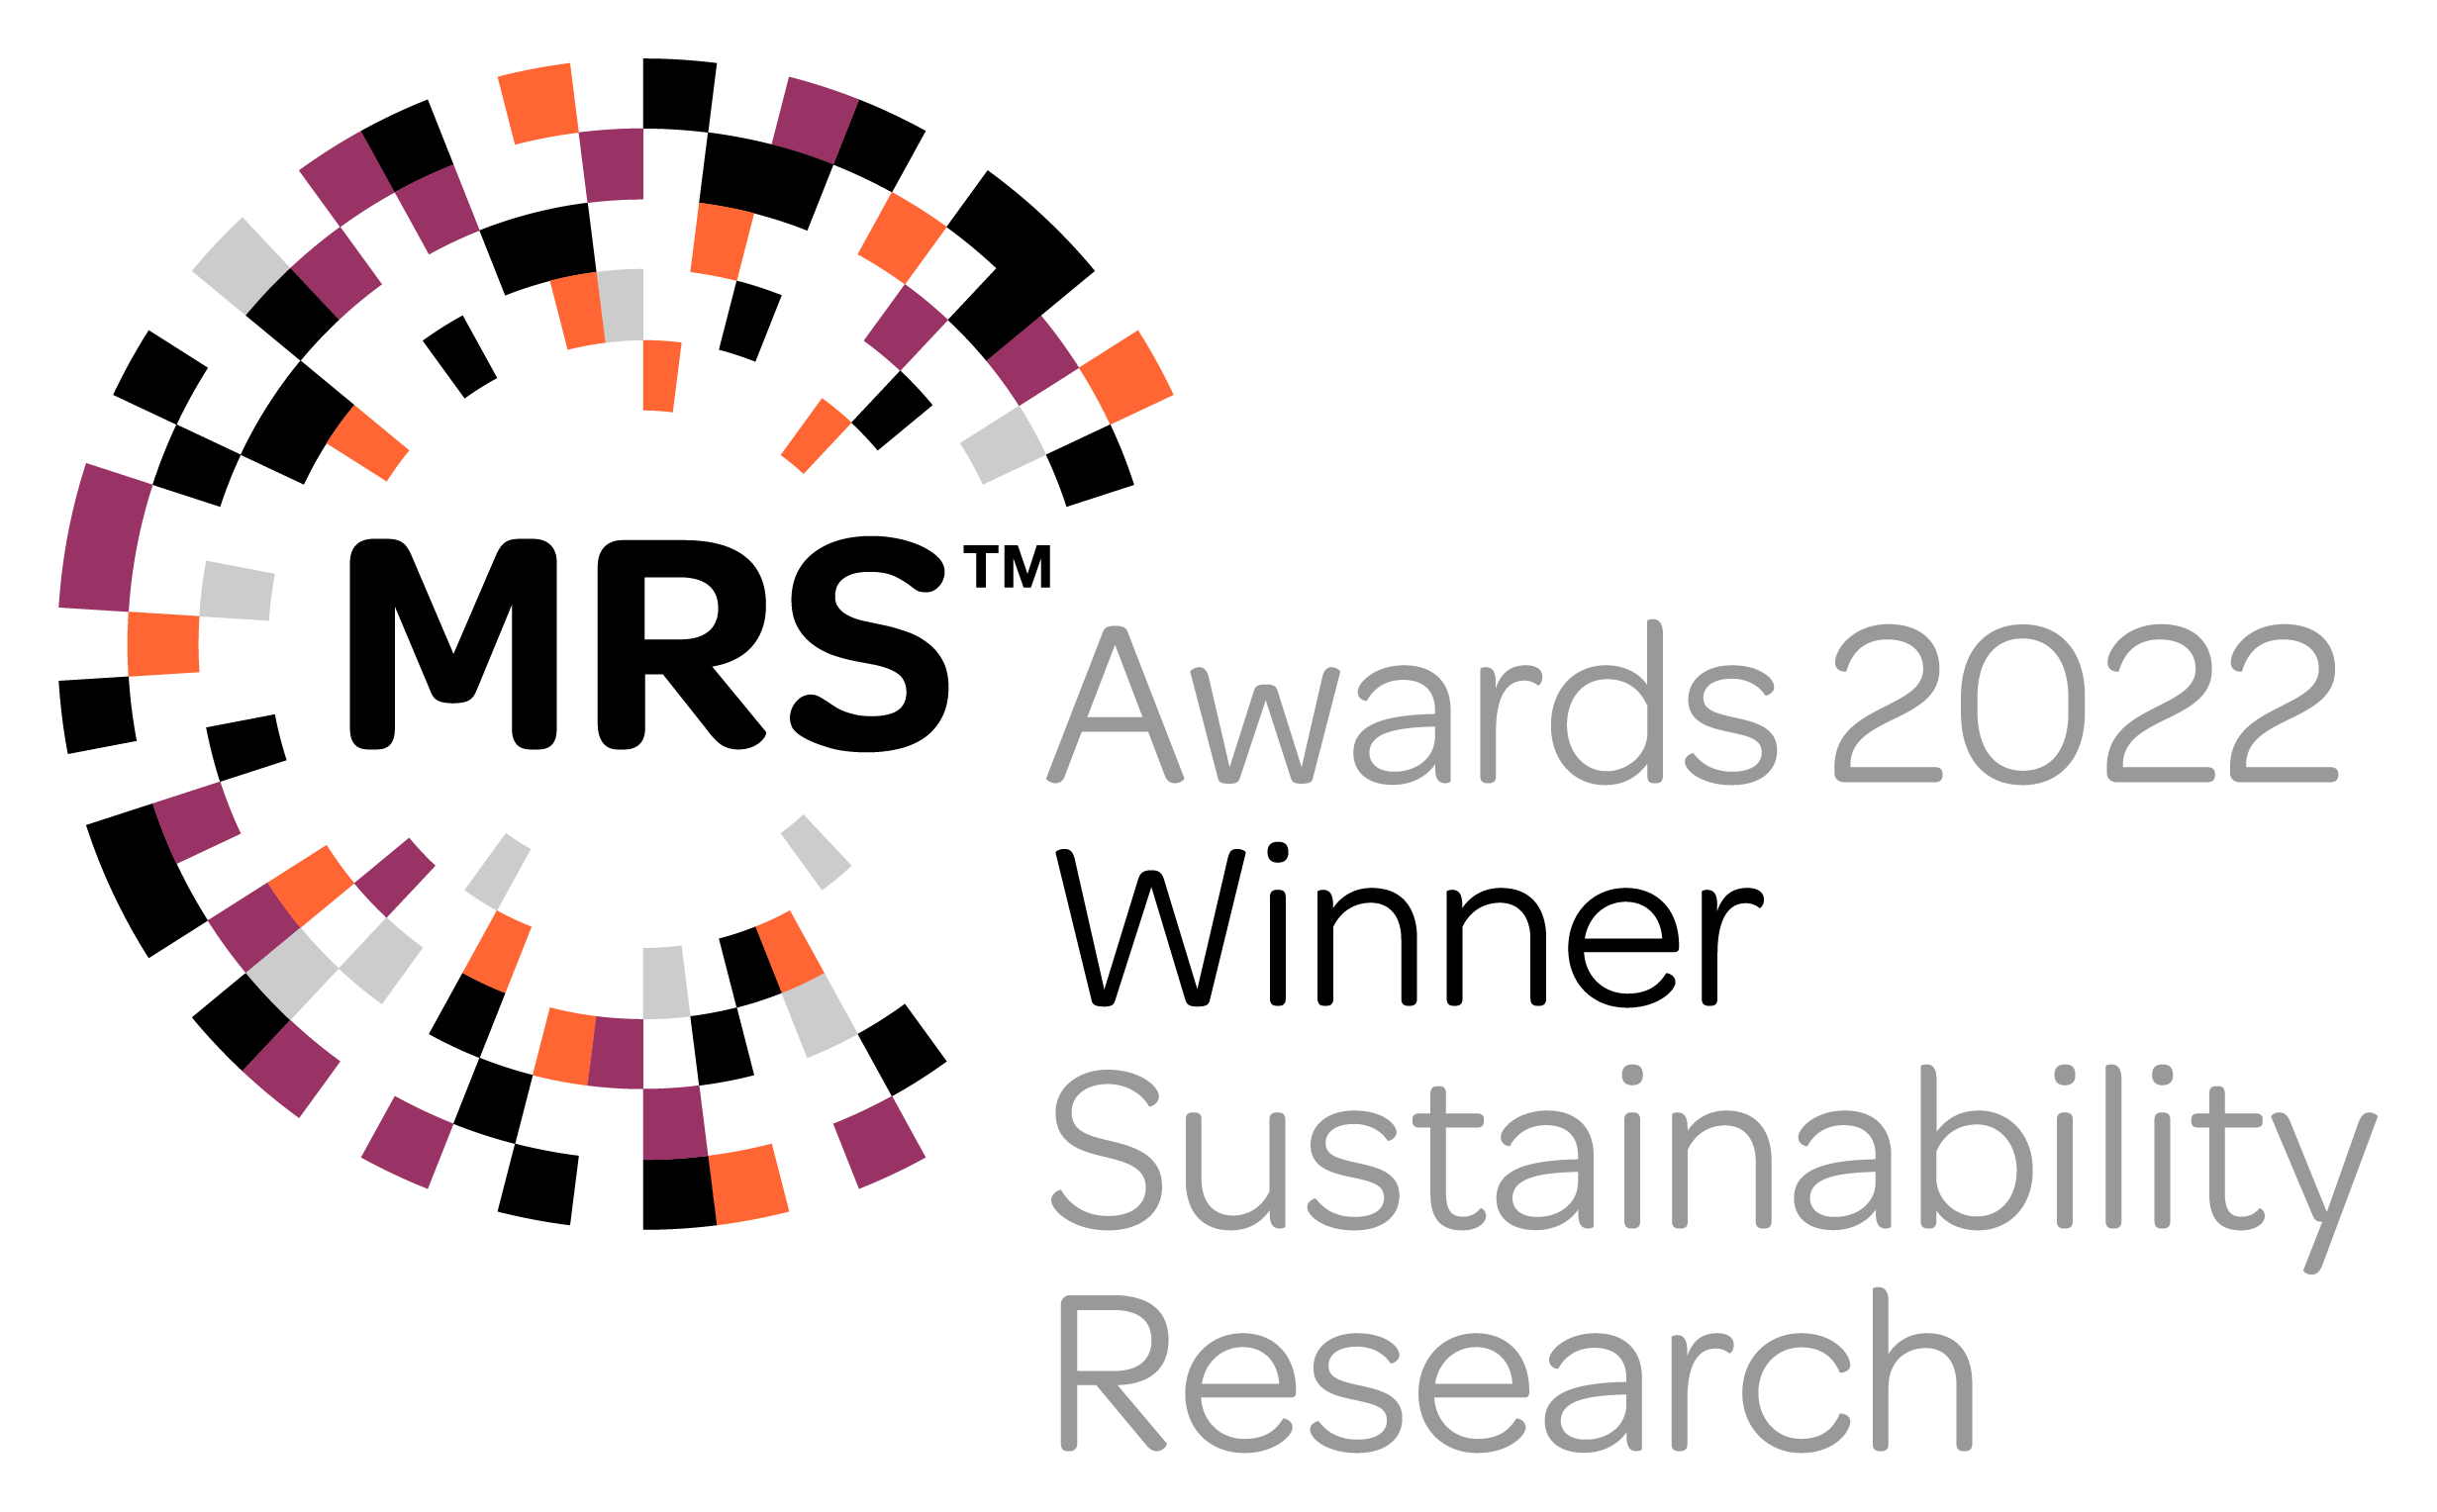 MRS Award - Winner of Sustainability Research 2022